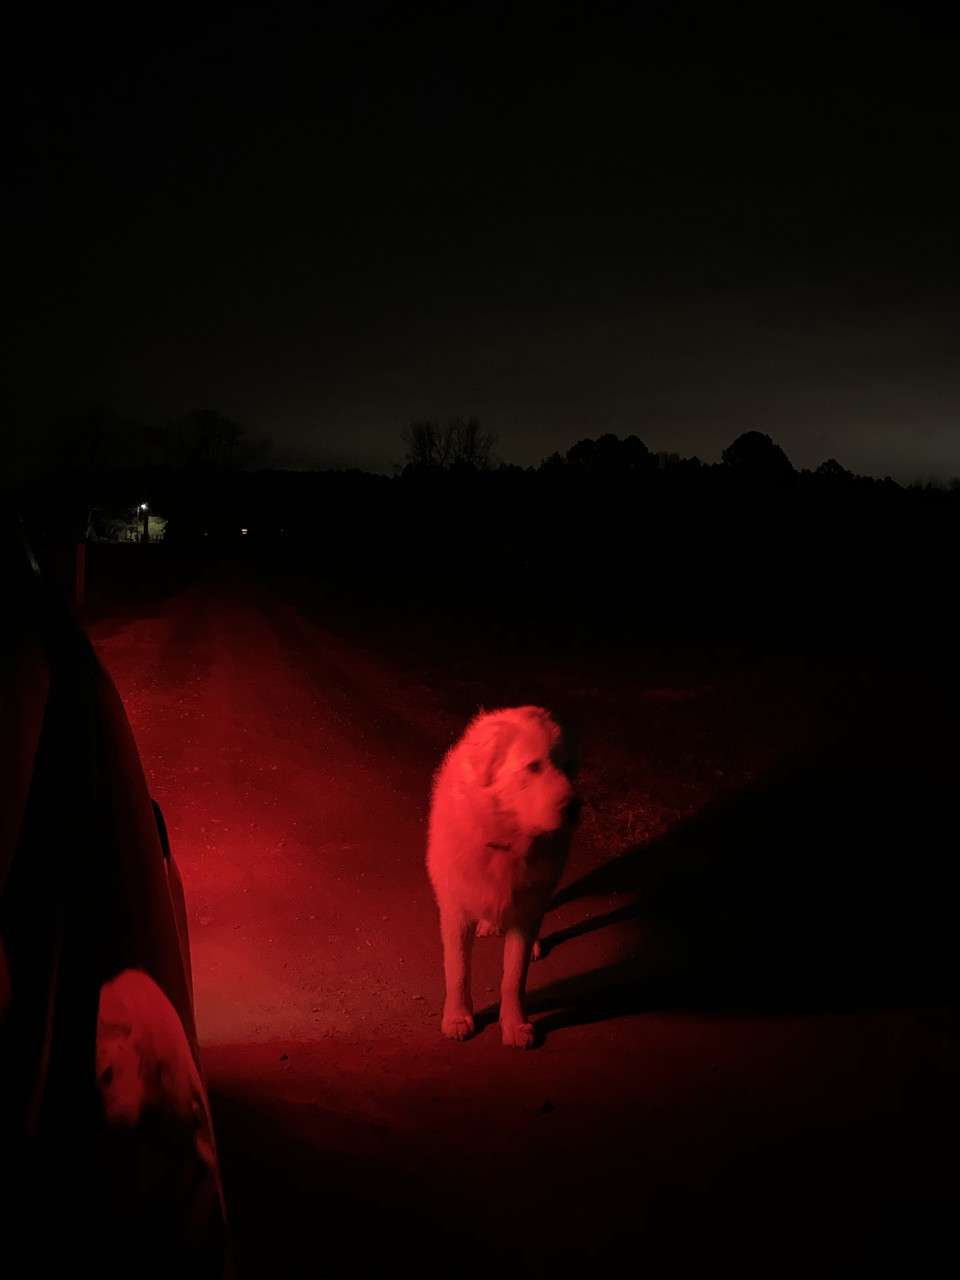 Archival inkjet prints on Canson Platine Fibre Rag by Lindsay Metivier, dog standing on the street in the glow of car tail light